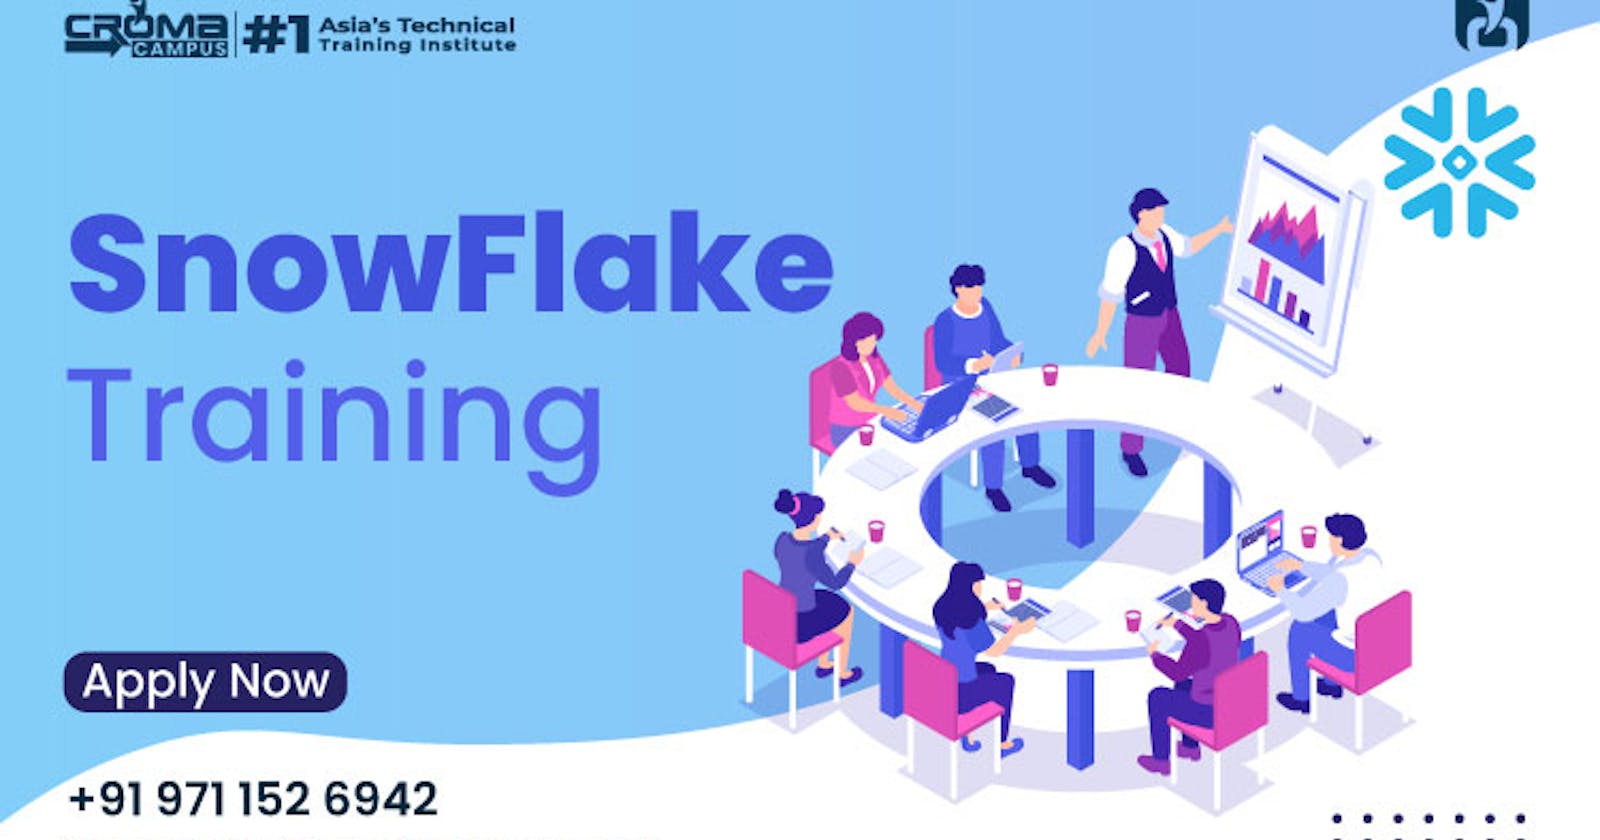 What Are The Pros Of SnowFlake In IT Industry?